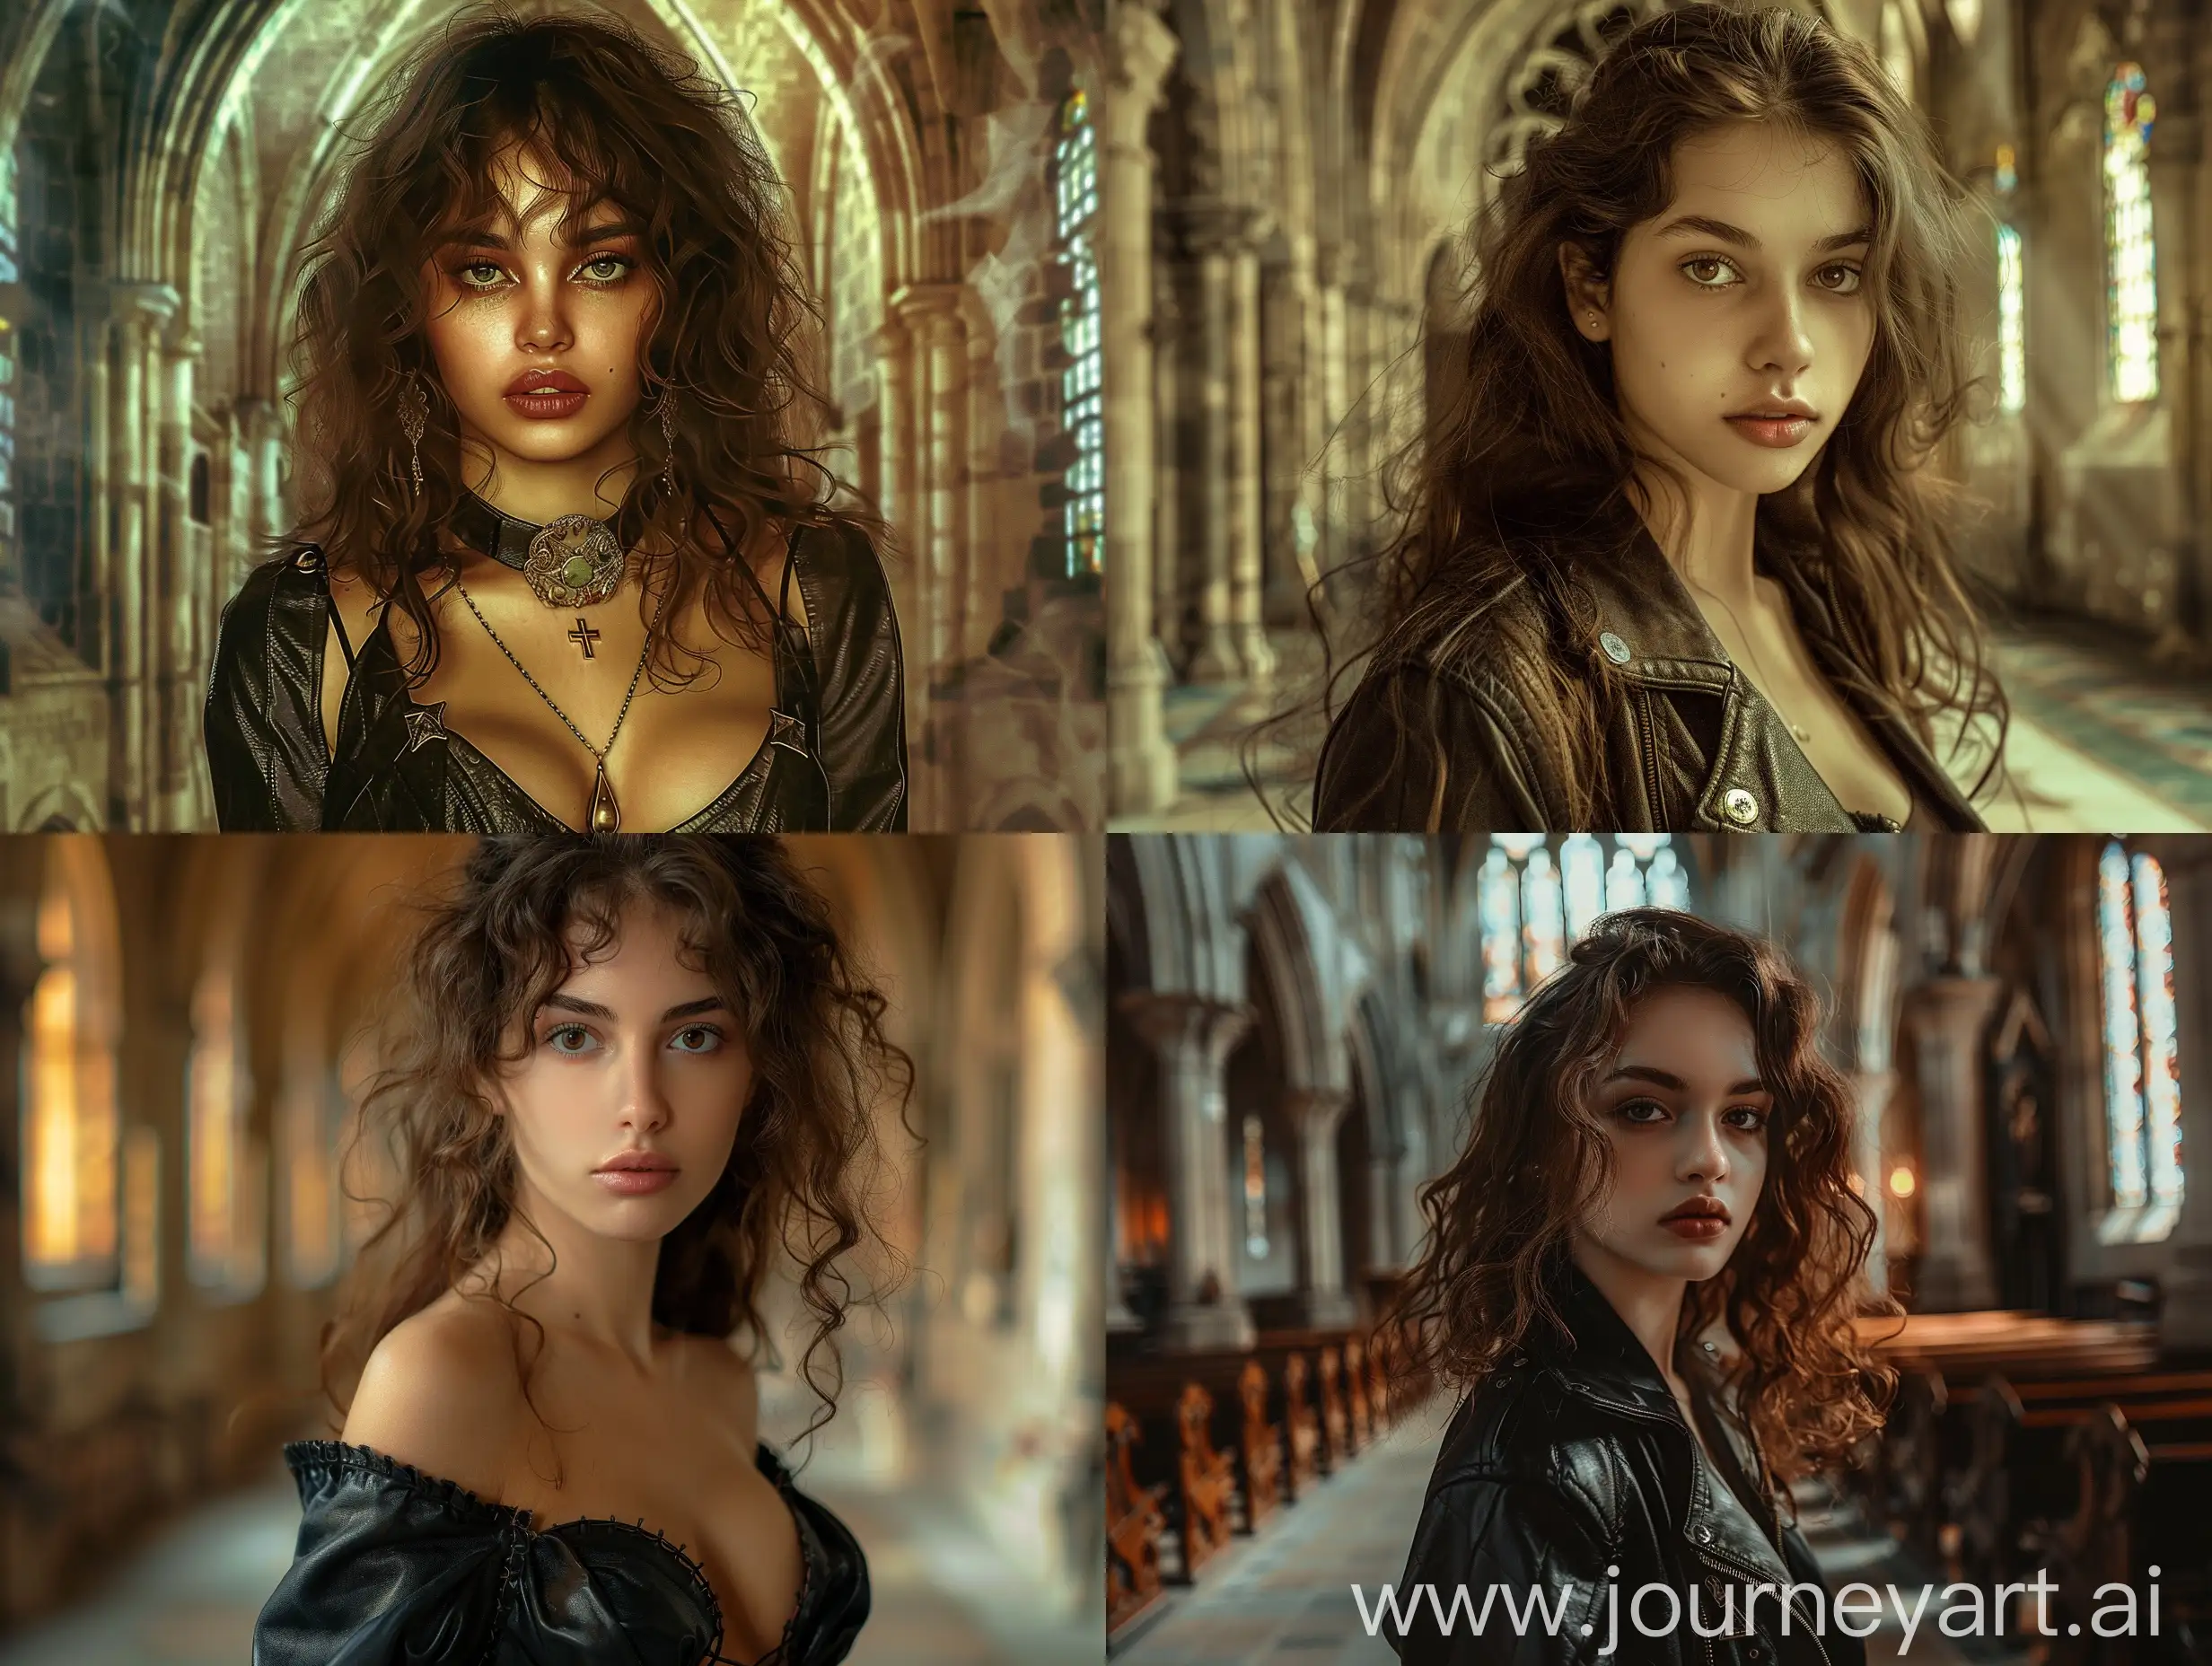 CurlyHaired-Girl-in-Leather-Clothing-in-Antique-Cathedral-Setting